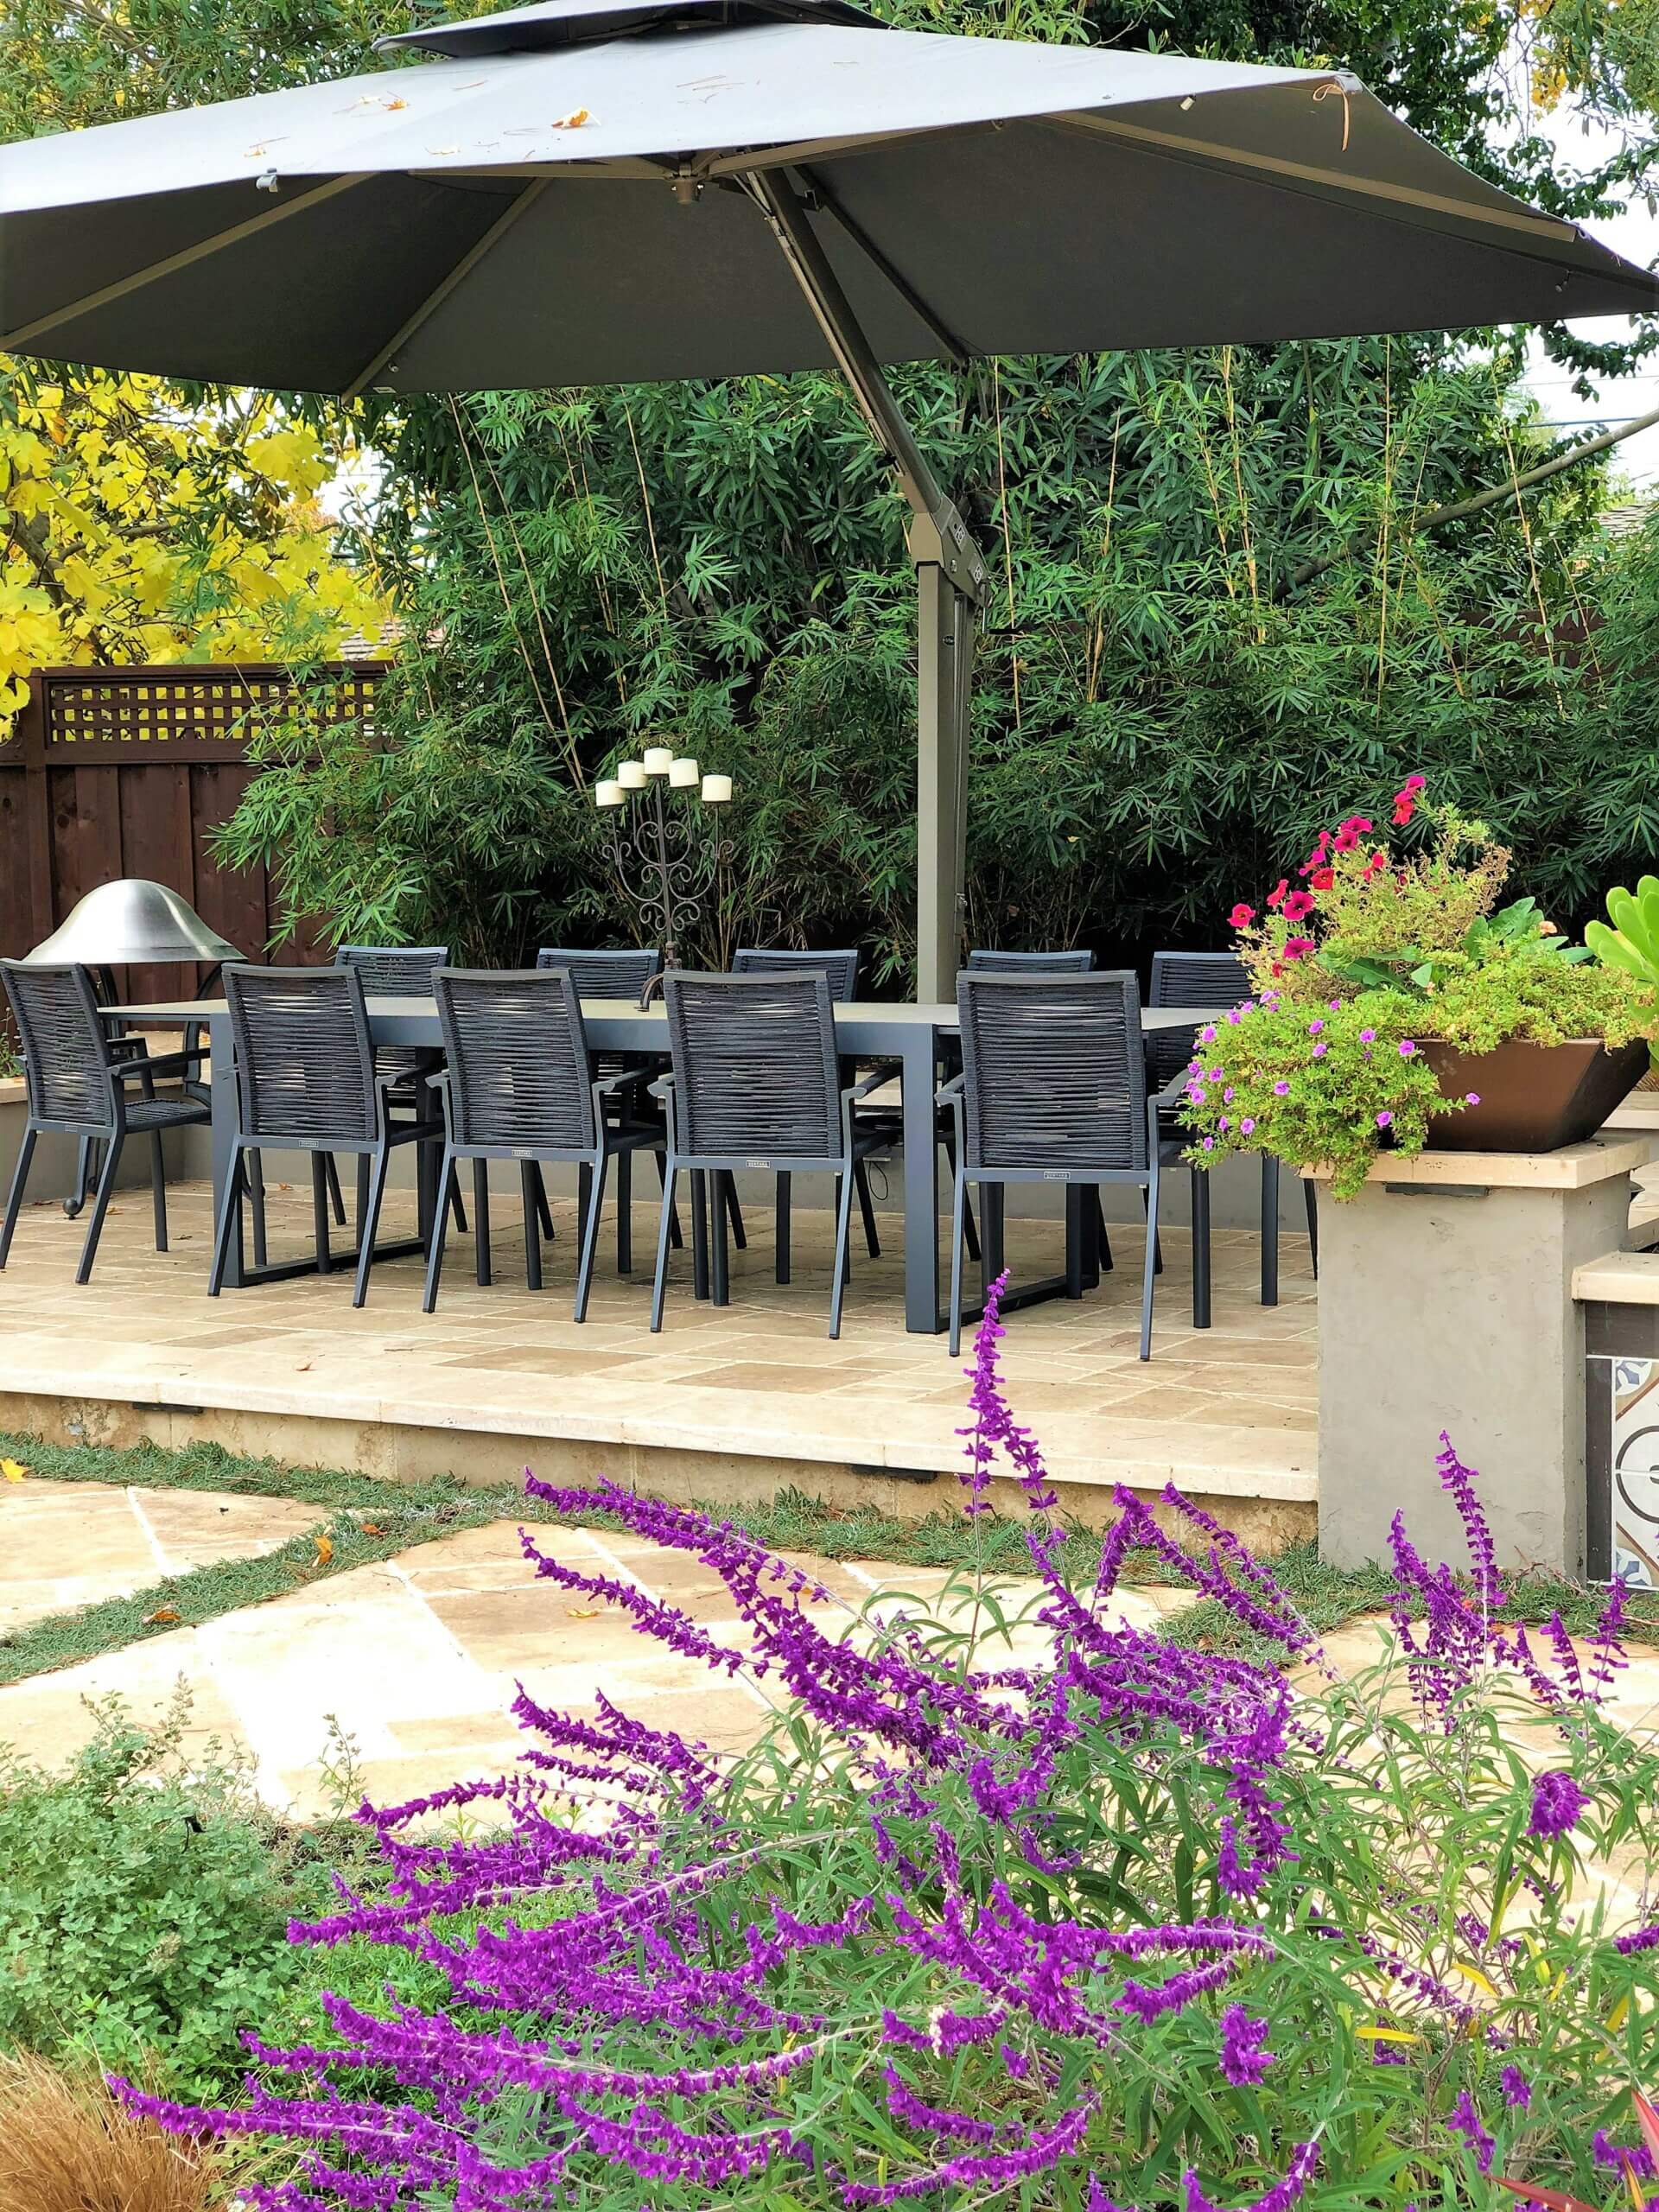 Outdoor dining area on umbrella covered paver raised patio